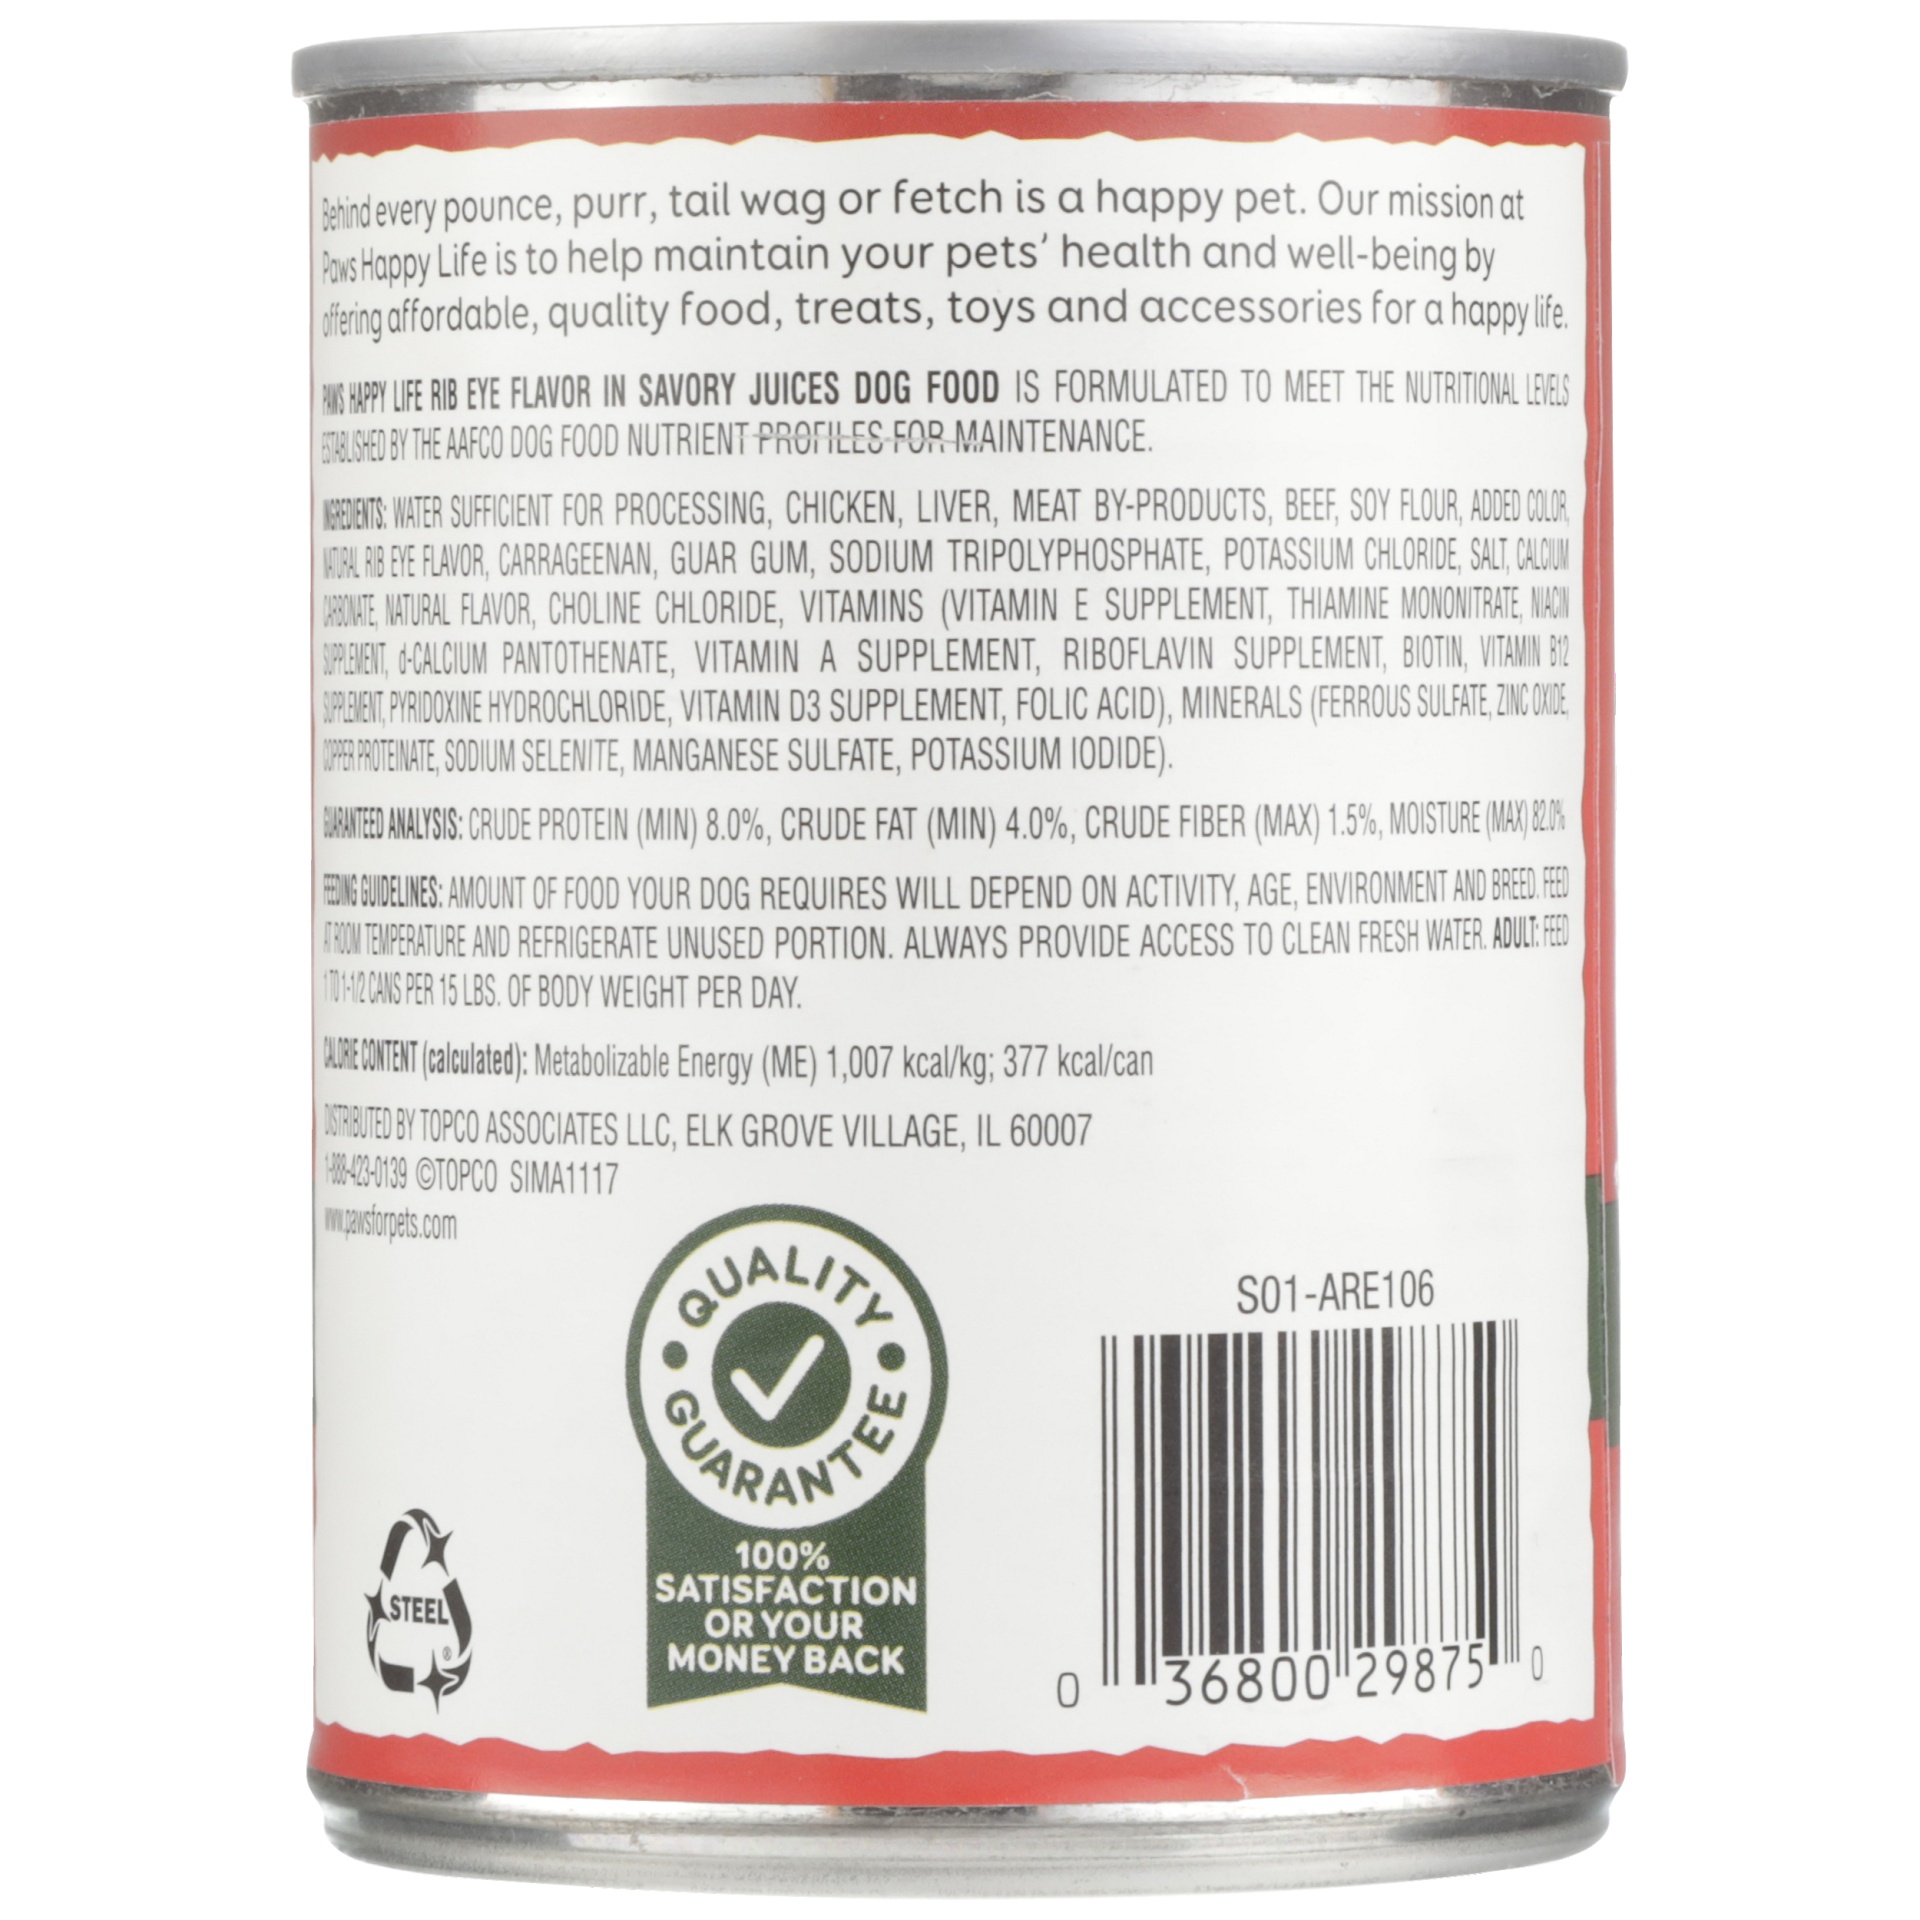 slide 2 of 6, Paws Happy Life Dog Food Can Rib Eye in Savory Juices, 13.2 oz